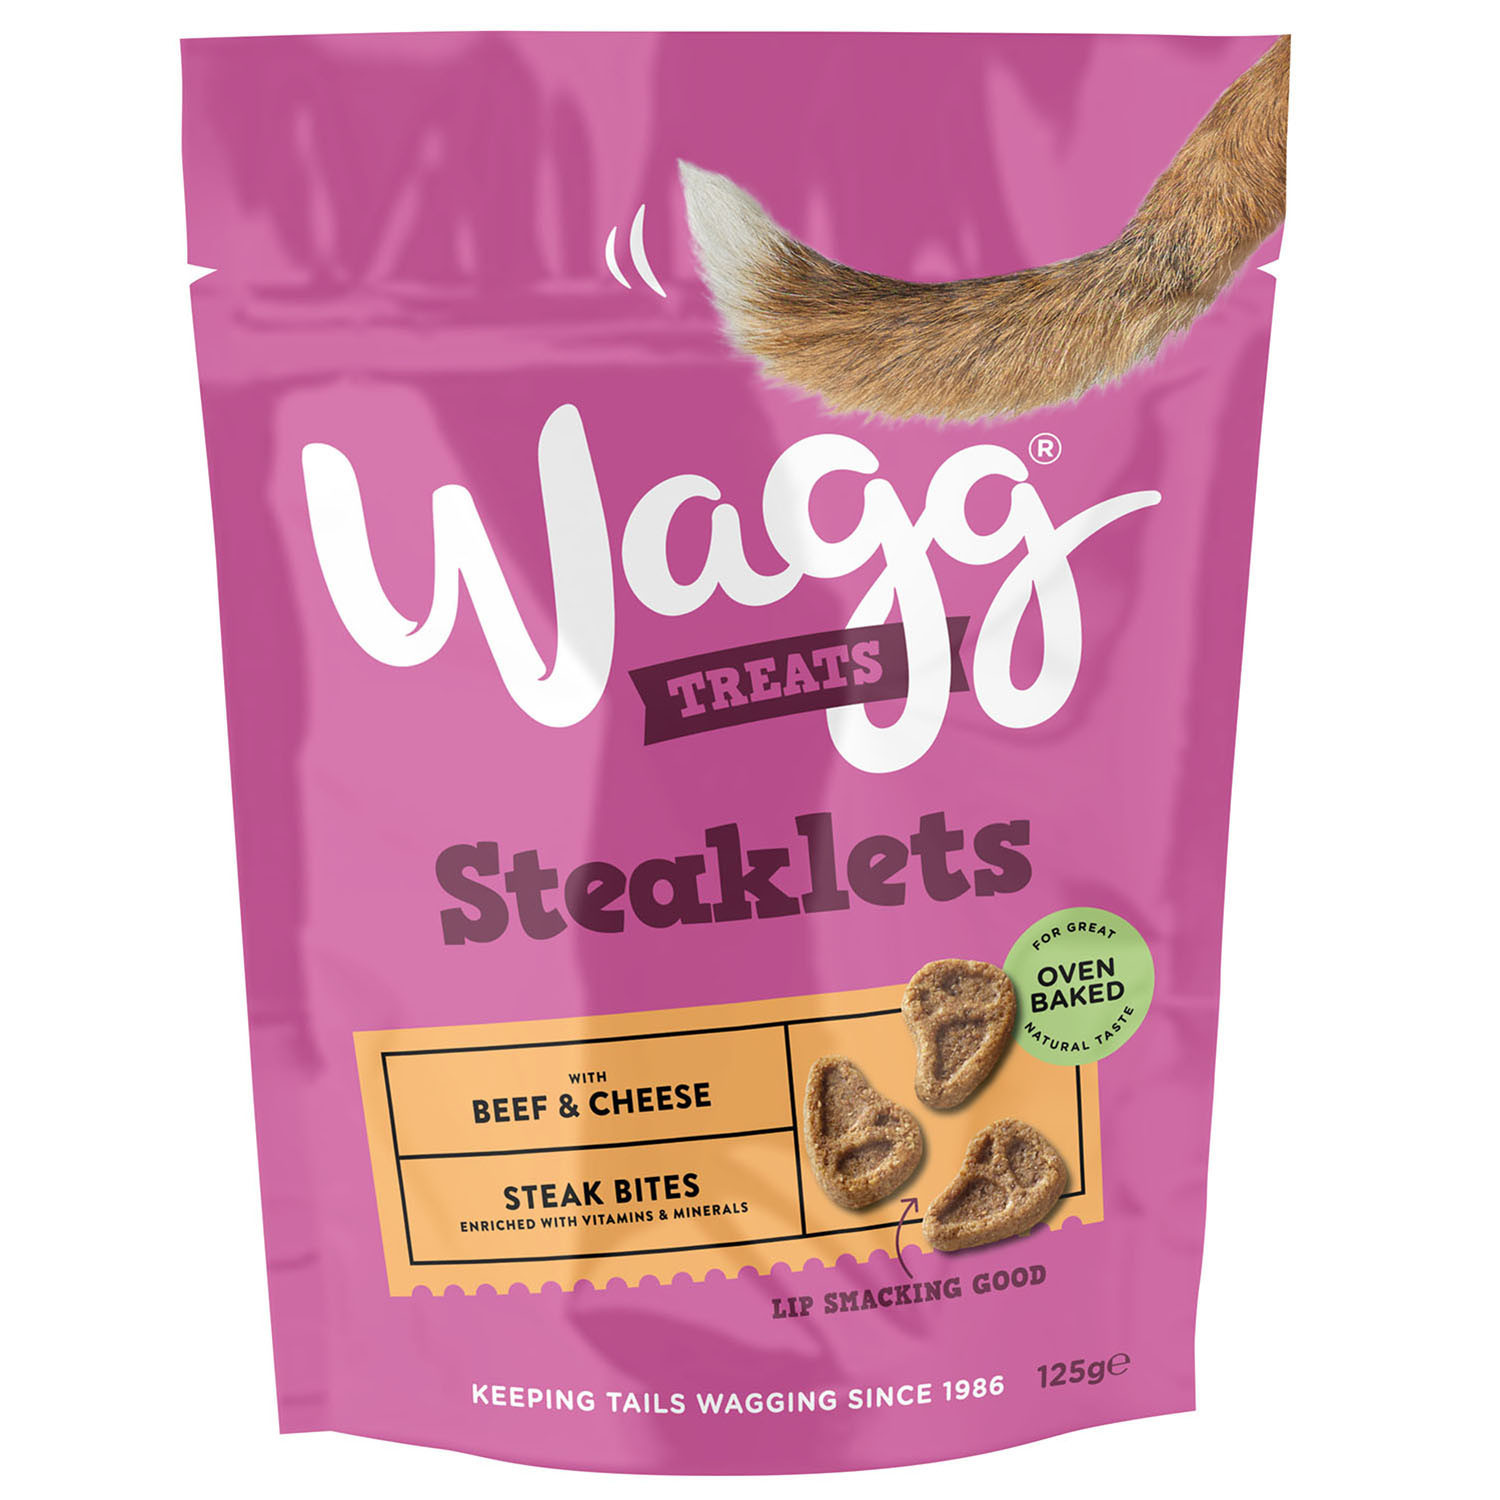 Wagg Steaklets Beef and Cheese Dog Treat 125g Image